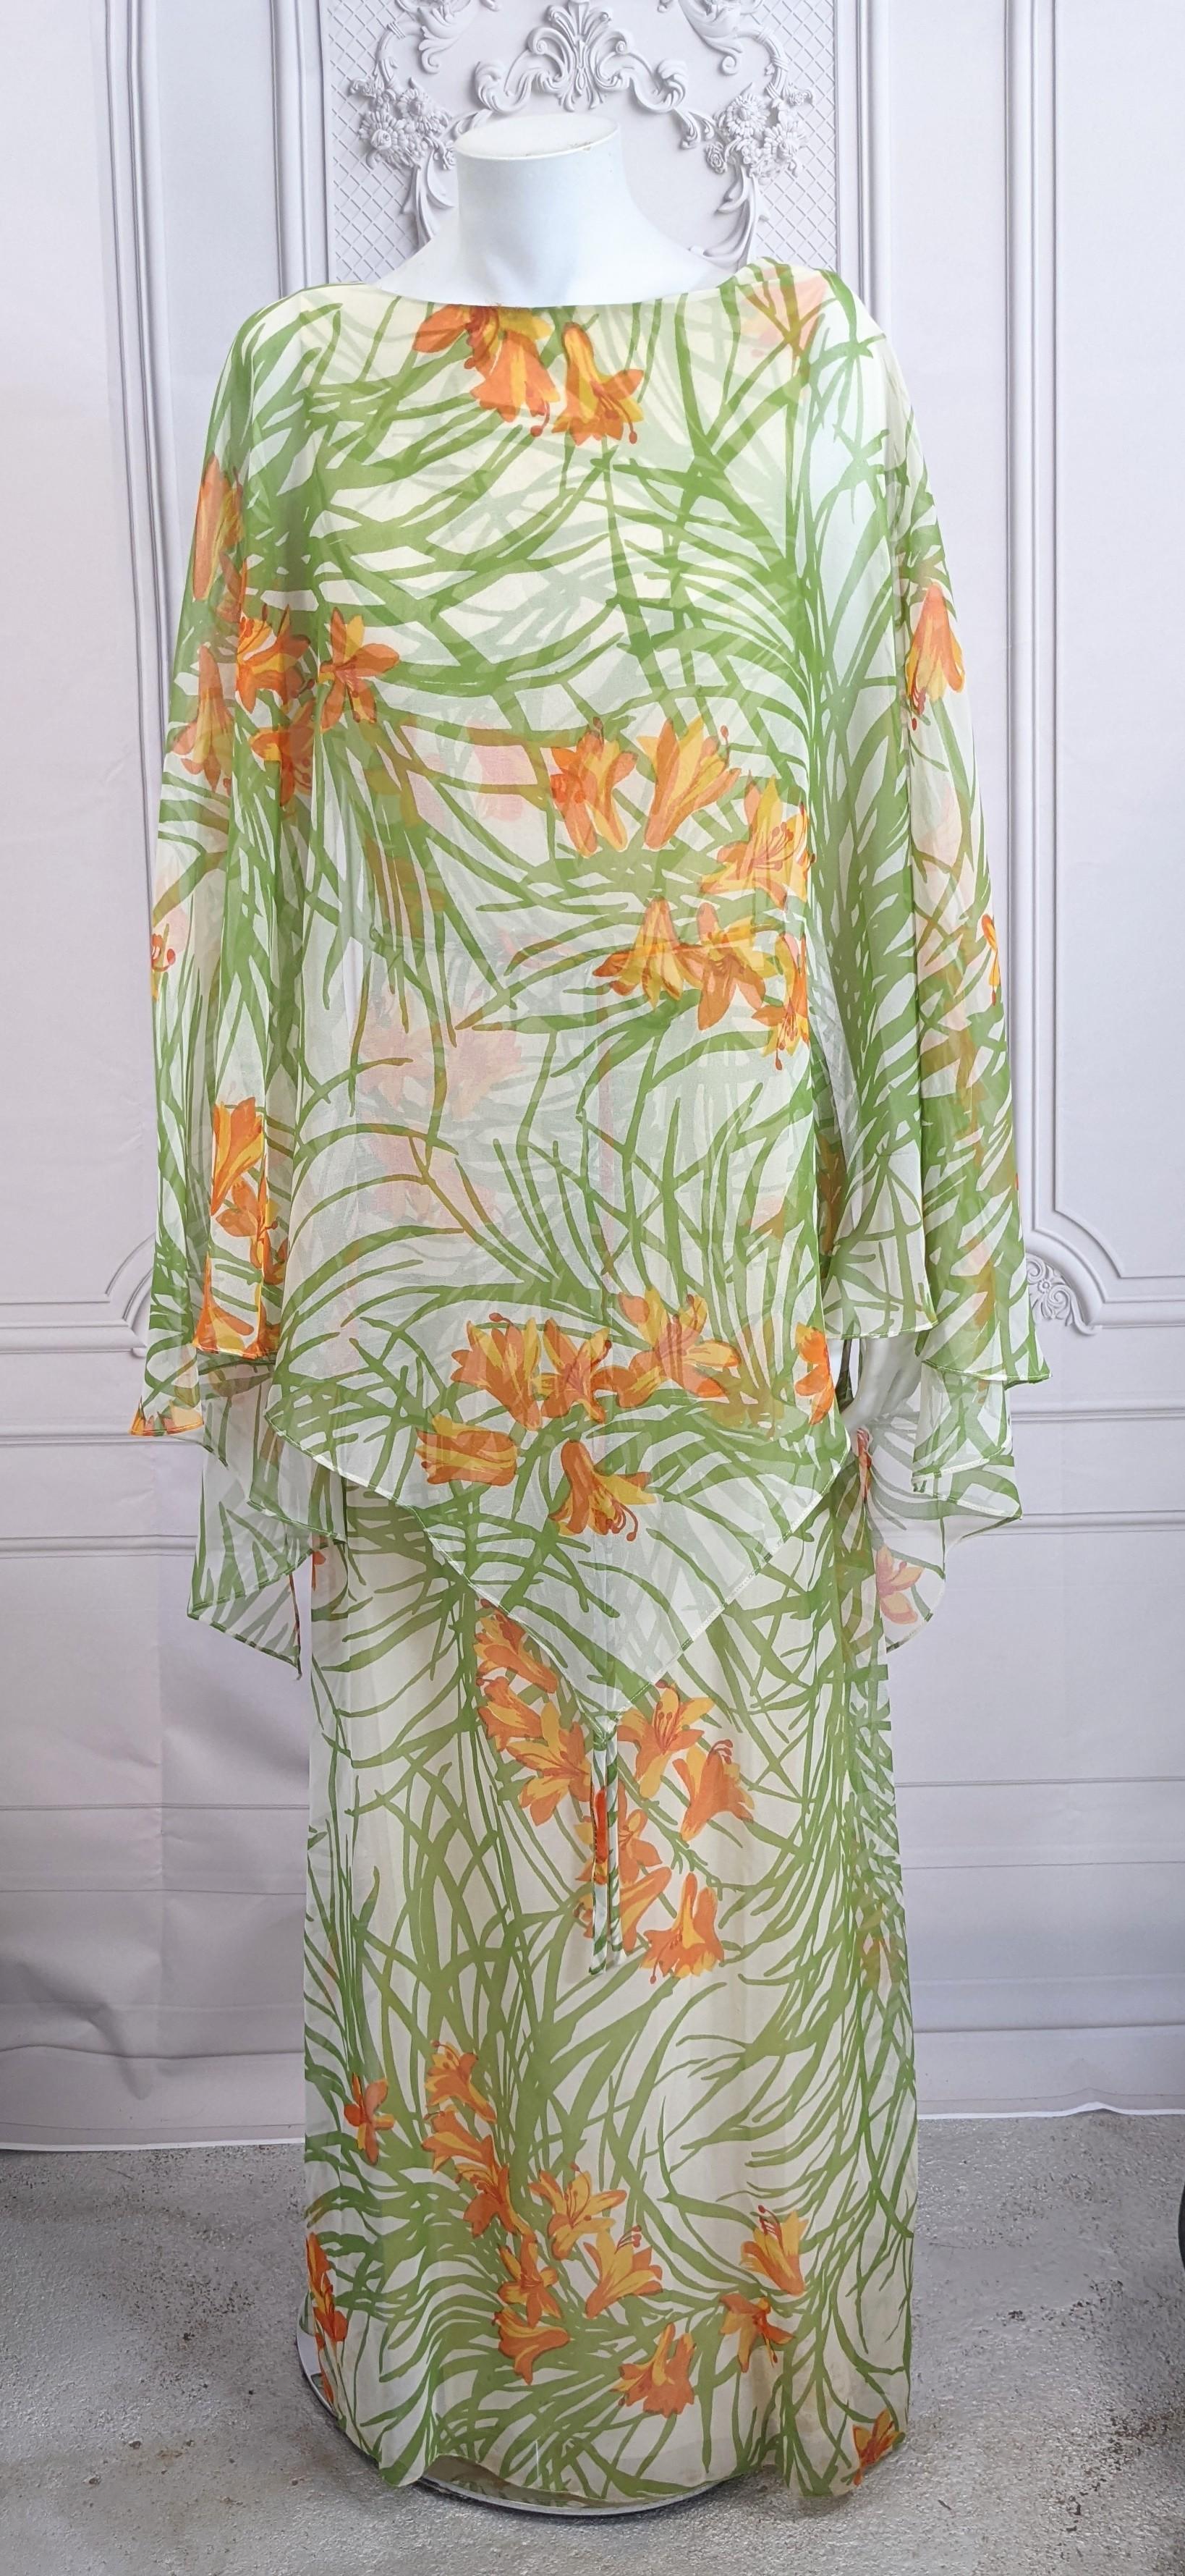 Flowy Anthony Muto chiffon gown with overall morning glory and foliage print. A simple one piece wide necked sheath gown with wrapped back bodice has a large triangular scarf attached along the front neckline. Rayon. Back wrap with zipper. 1970's